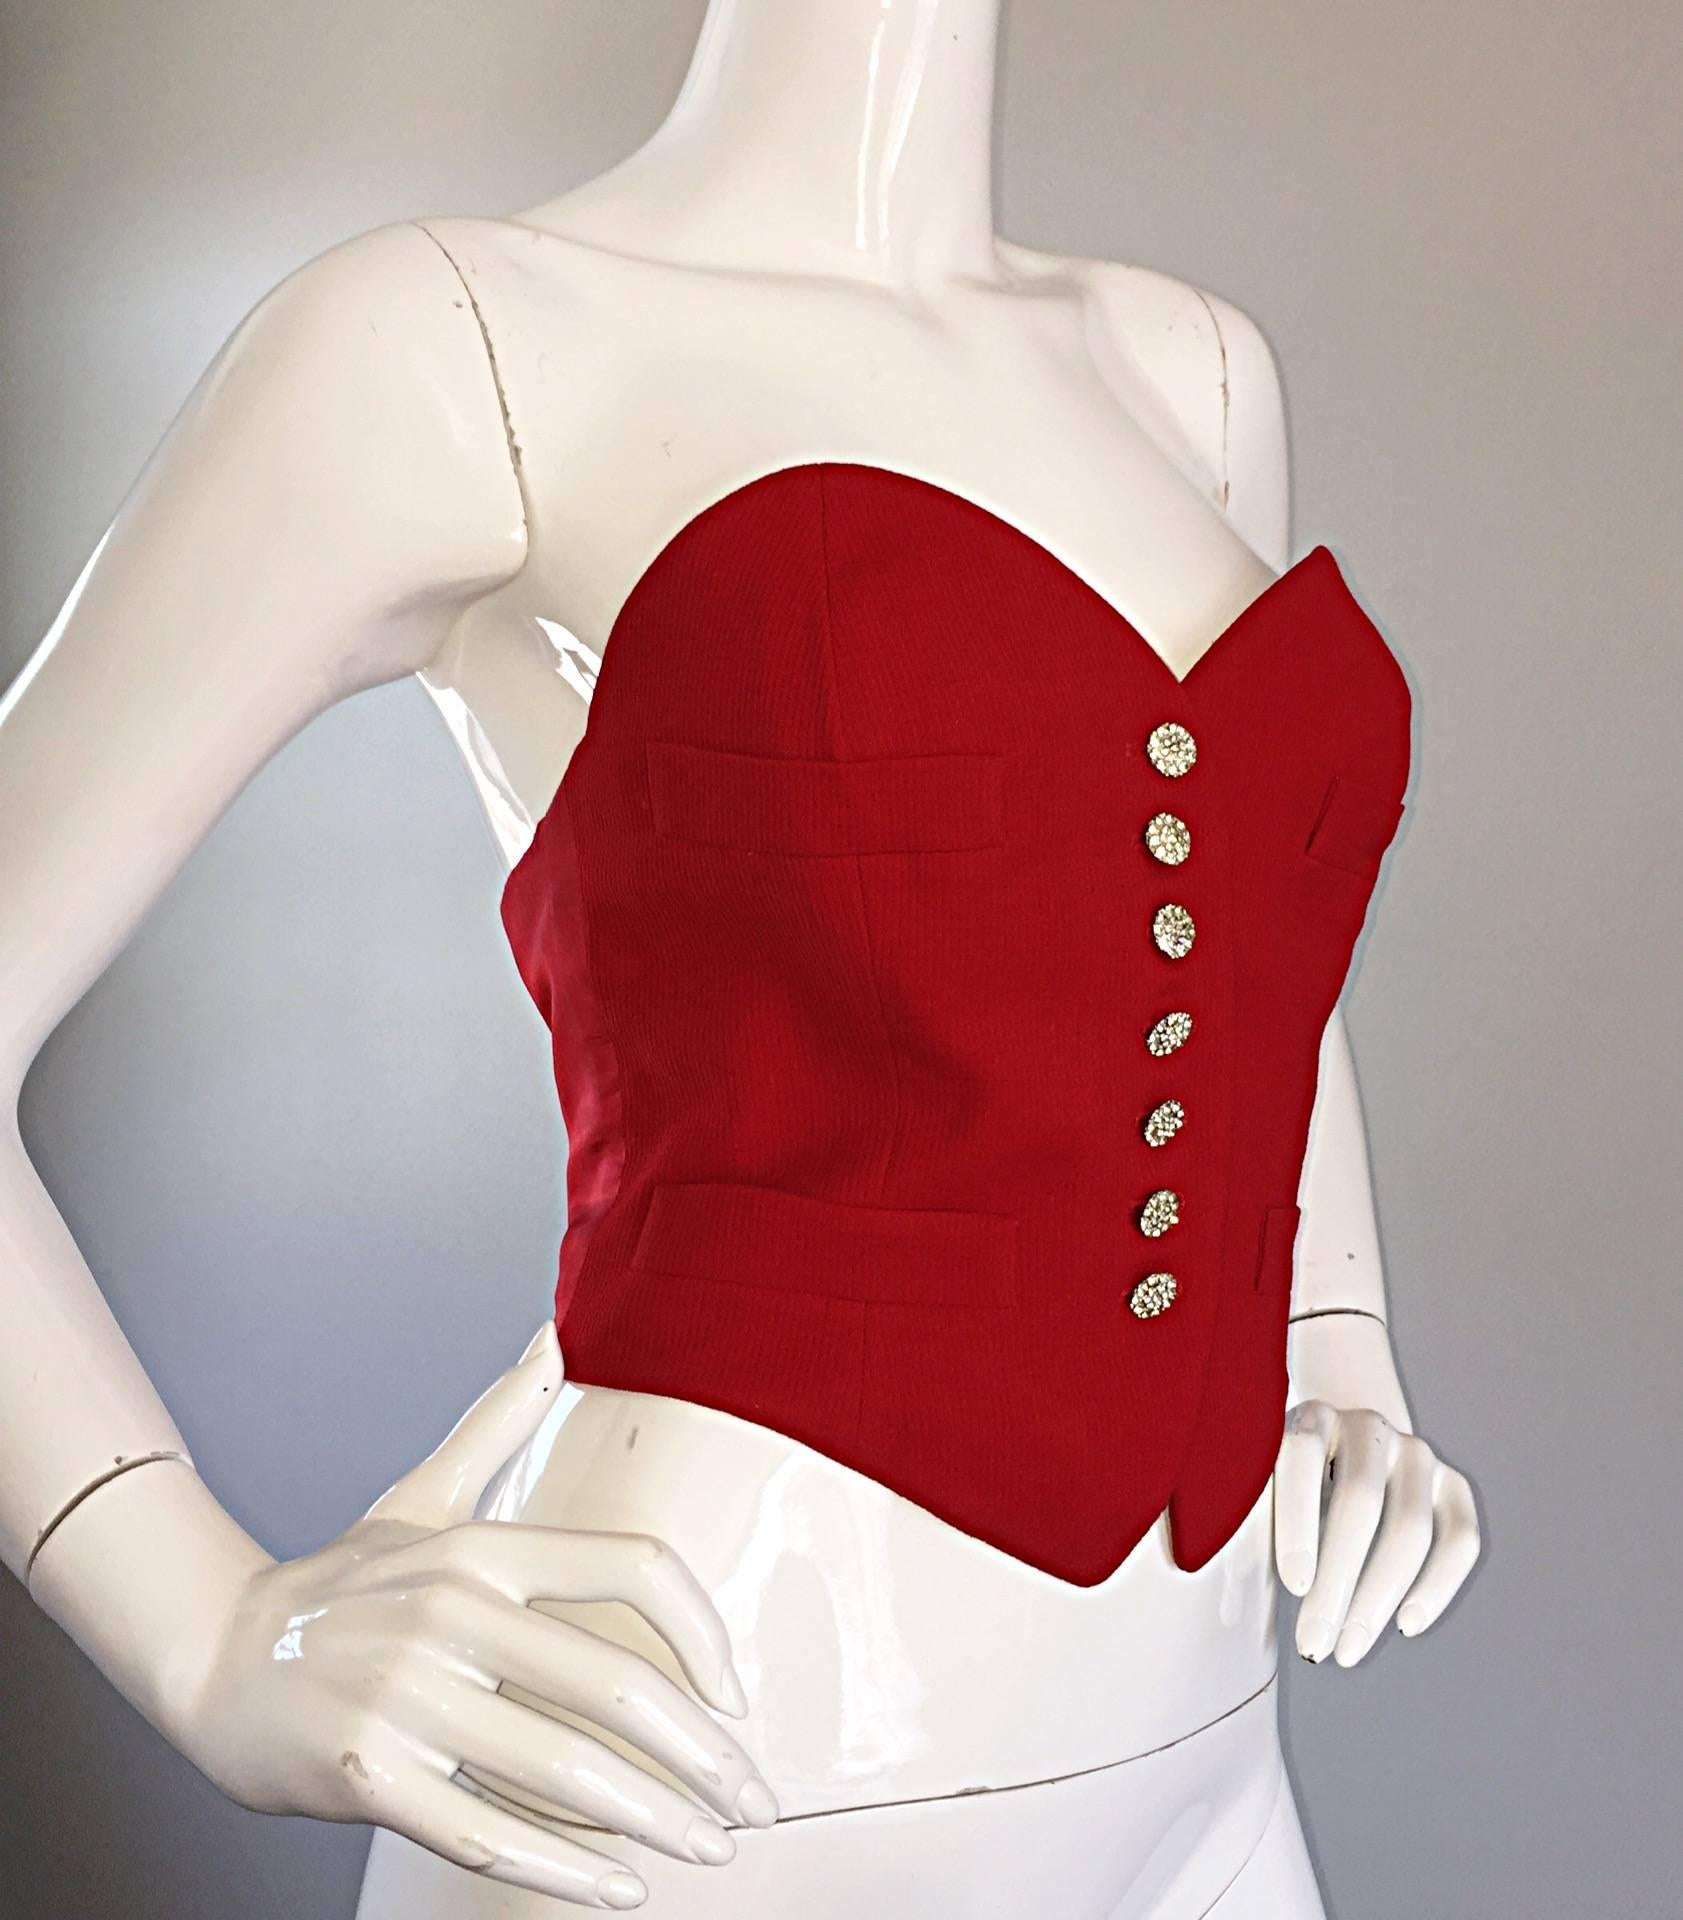 Women's Rare Vintage Moschino Couture Red ' Heart ' Bustier Top w/ Rhinestone Buttons